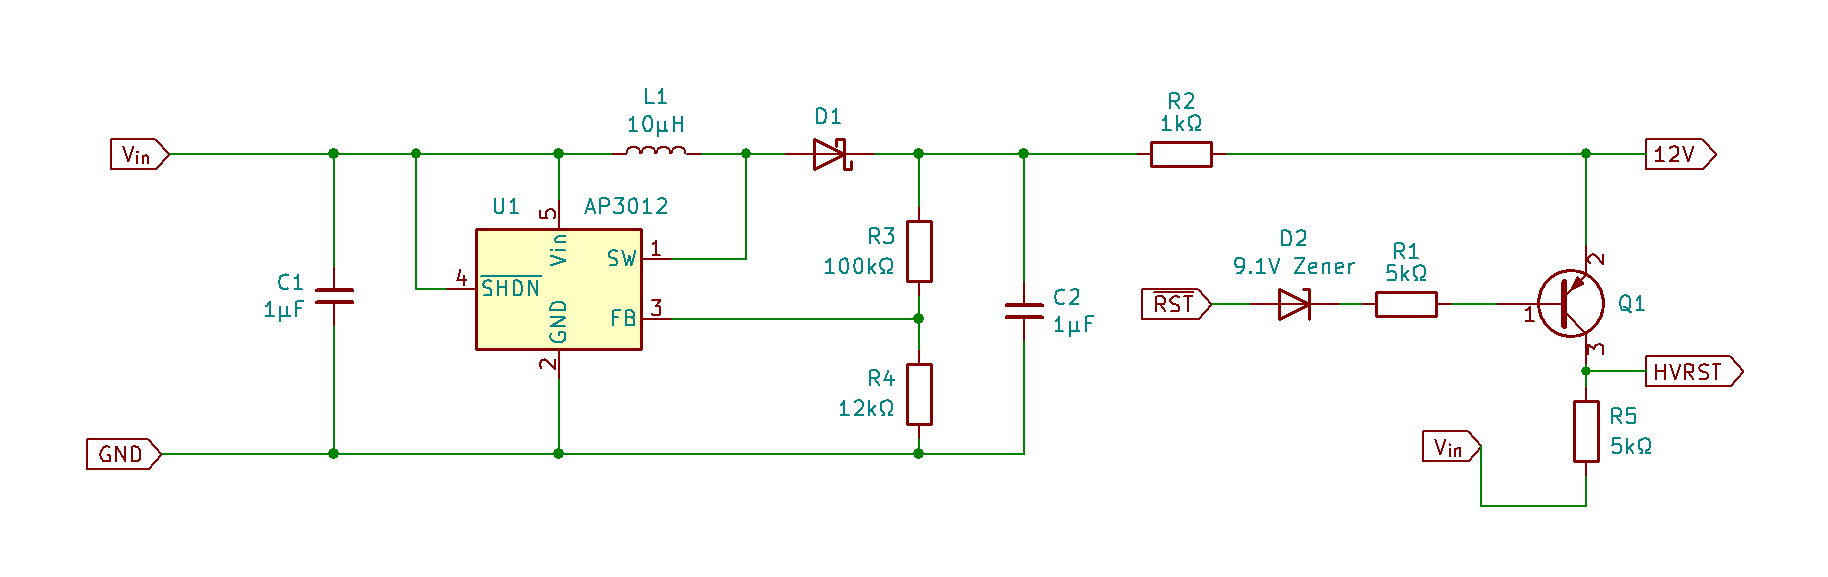 A schematic showing a 12V boost converter and an output that switches between 12V and 5V